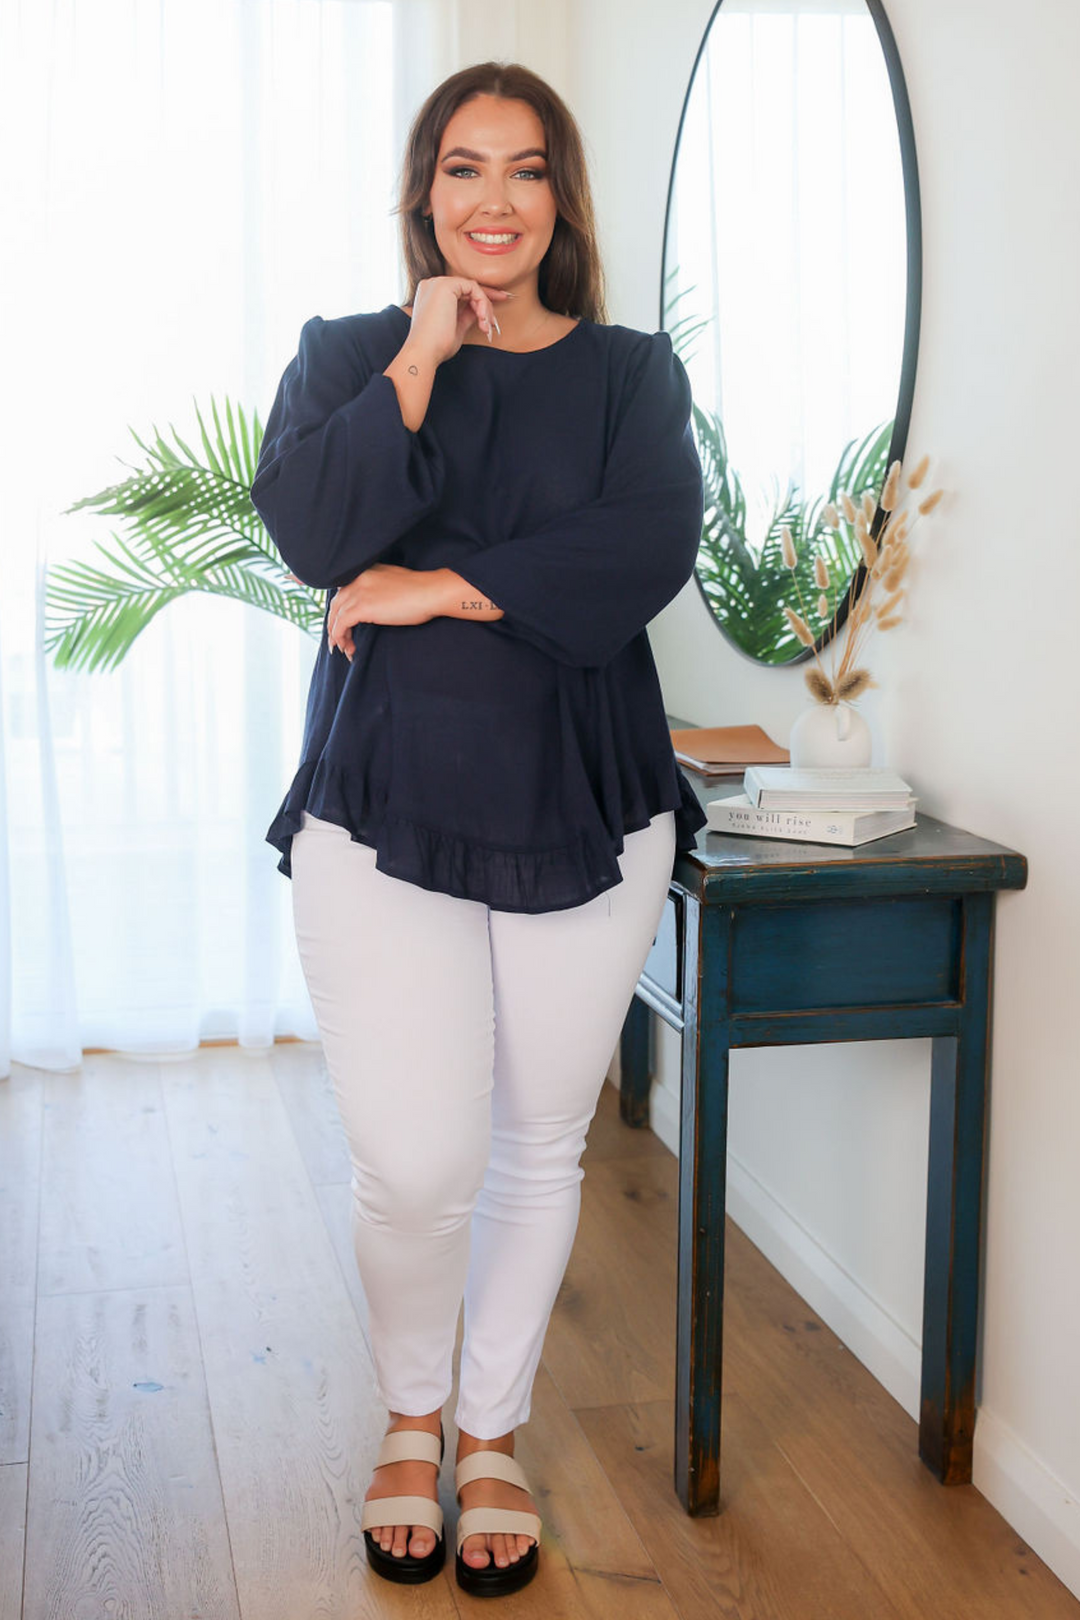 Ladies Long Sleeve Button Back Top - Round Neckline - Flowing Style - Navy - Sizes S/M - Xl/XXL - Mila Button Back Top Front Full Length View Paired with Delta White Jeans Daisy's Closet